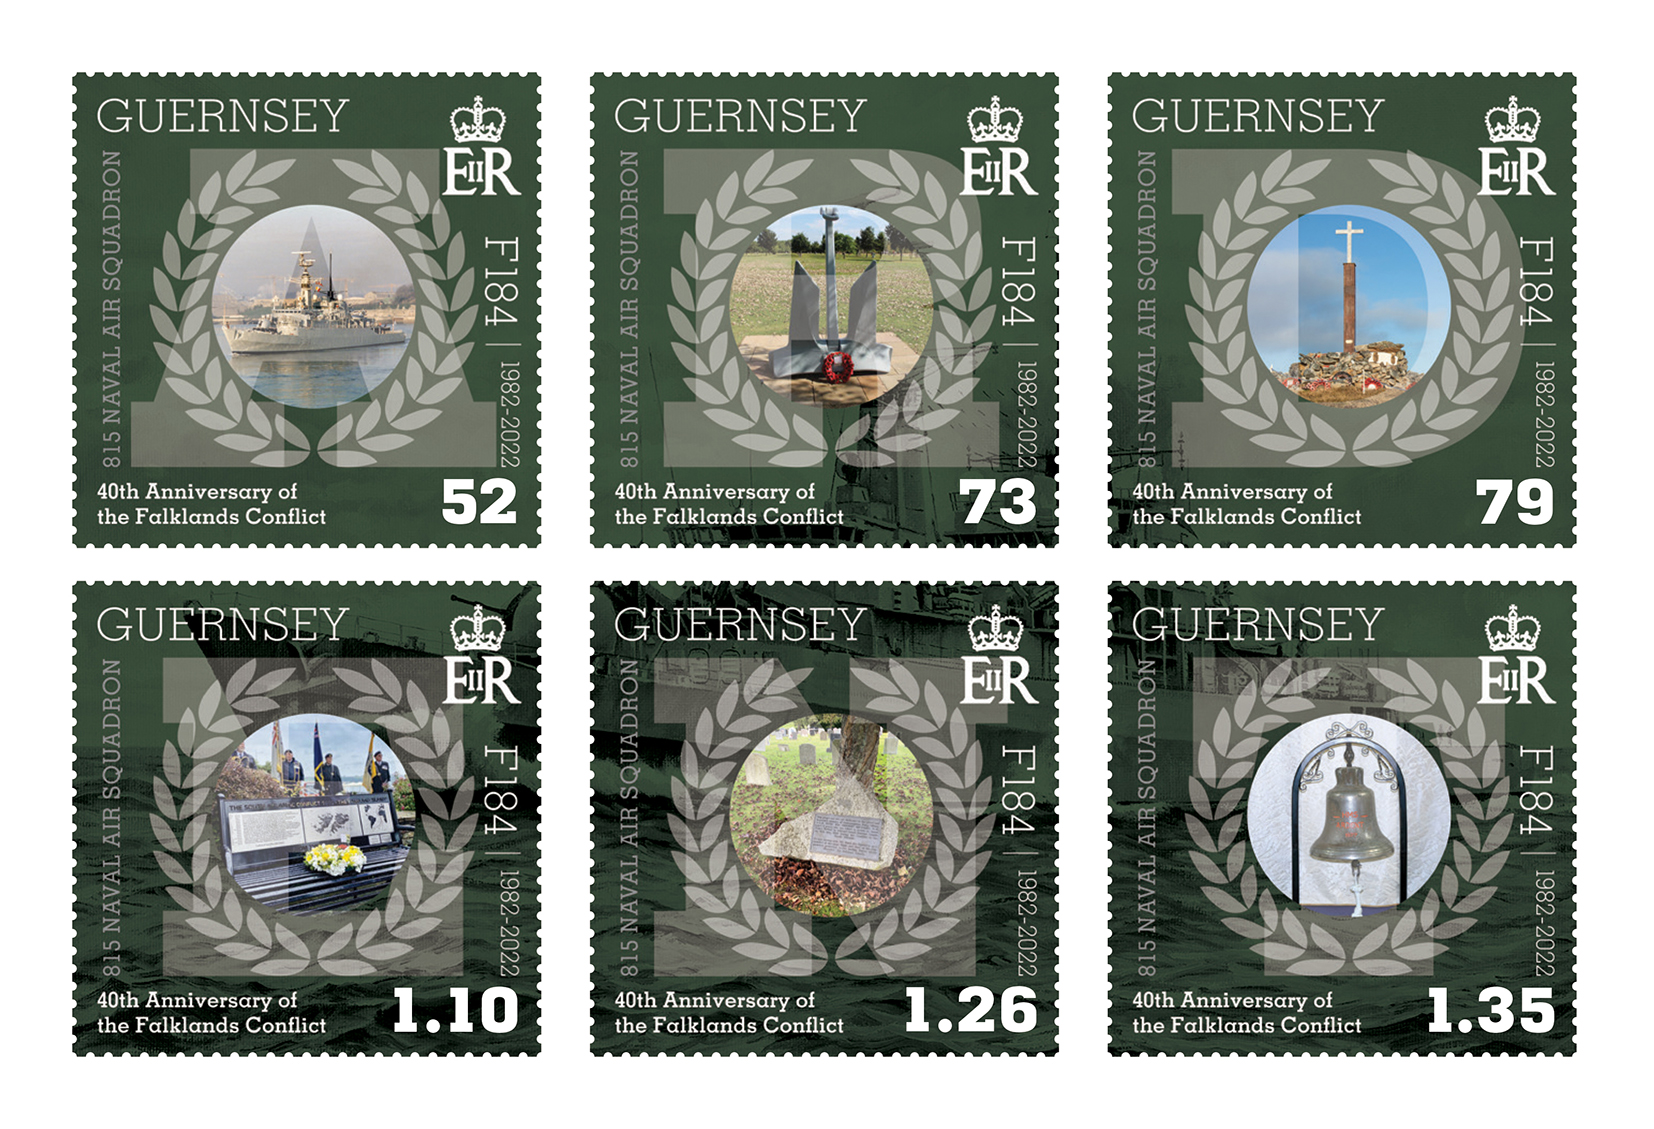 Guernsey Post's commemorative stamps mark 40th Anniversary of Falklands Conflict